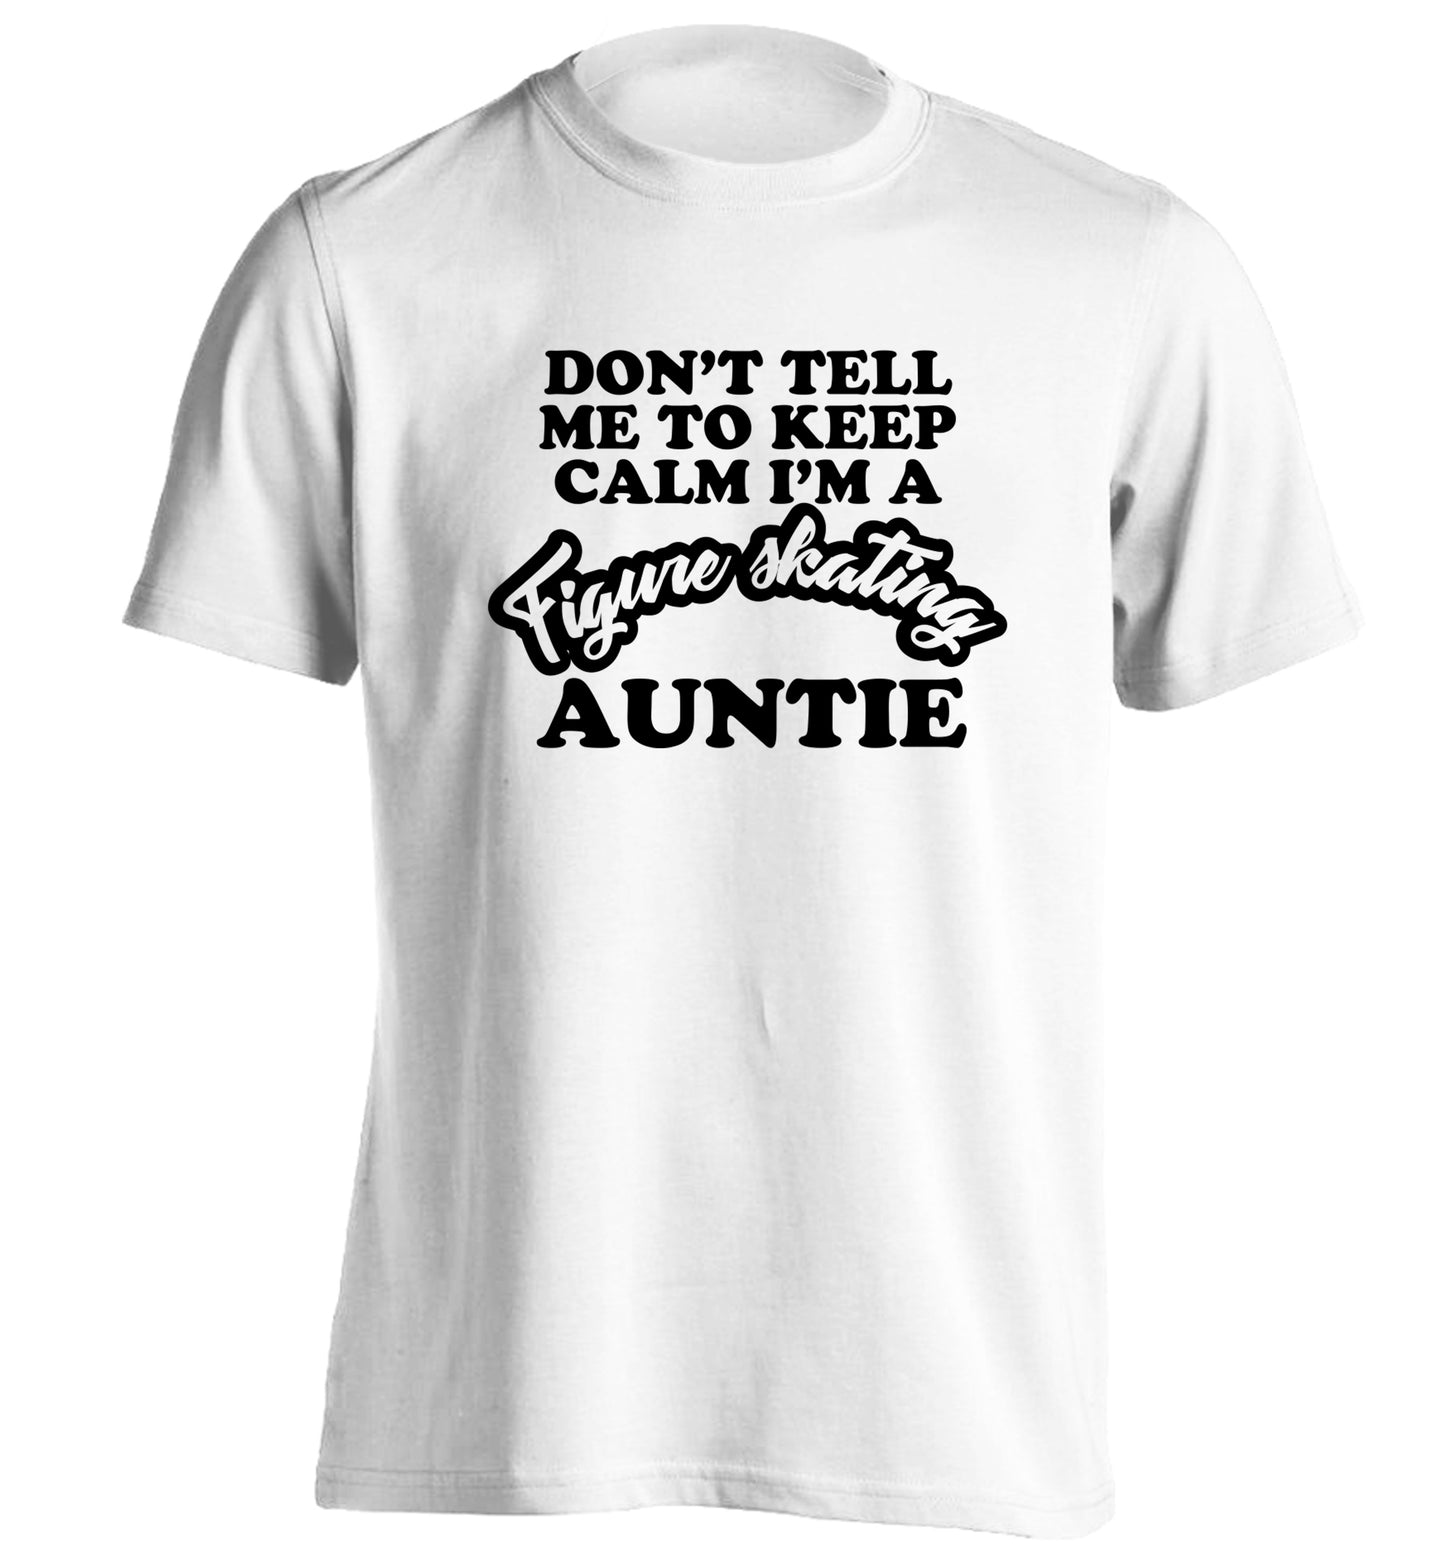 Don't tell me to keep calm I'm a figure skating auntie adults unisexwhite Tshirt 2XL